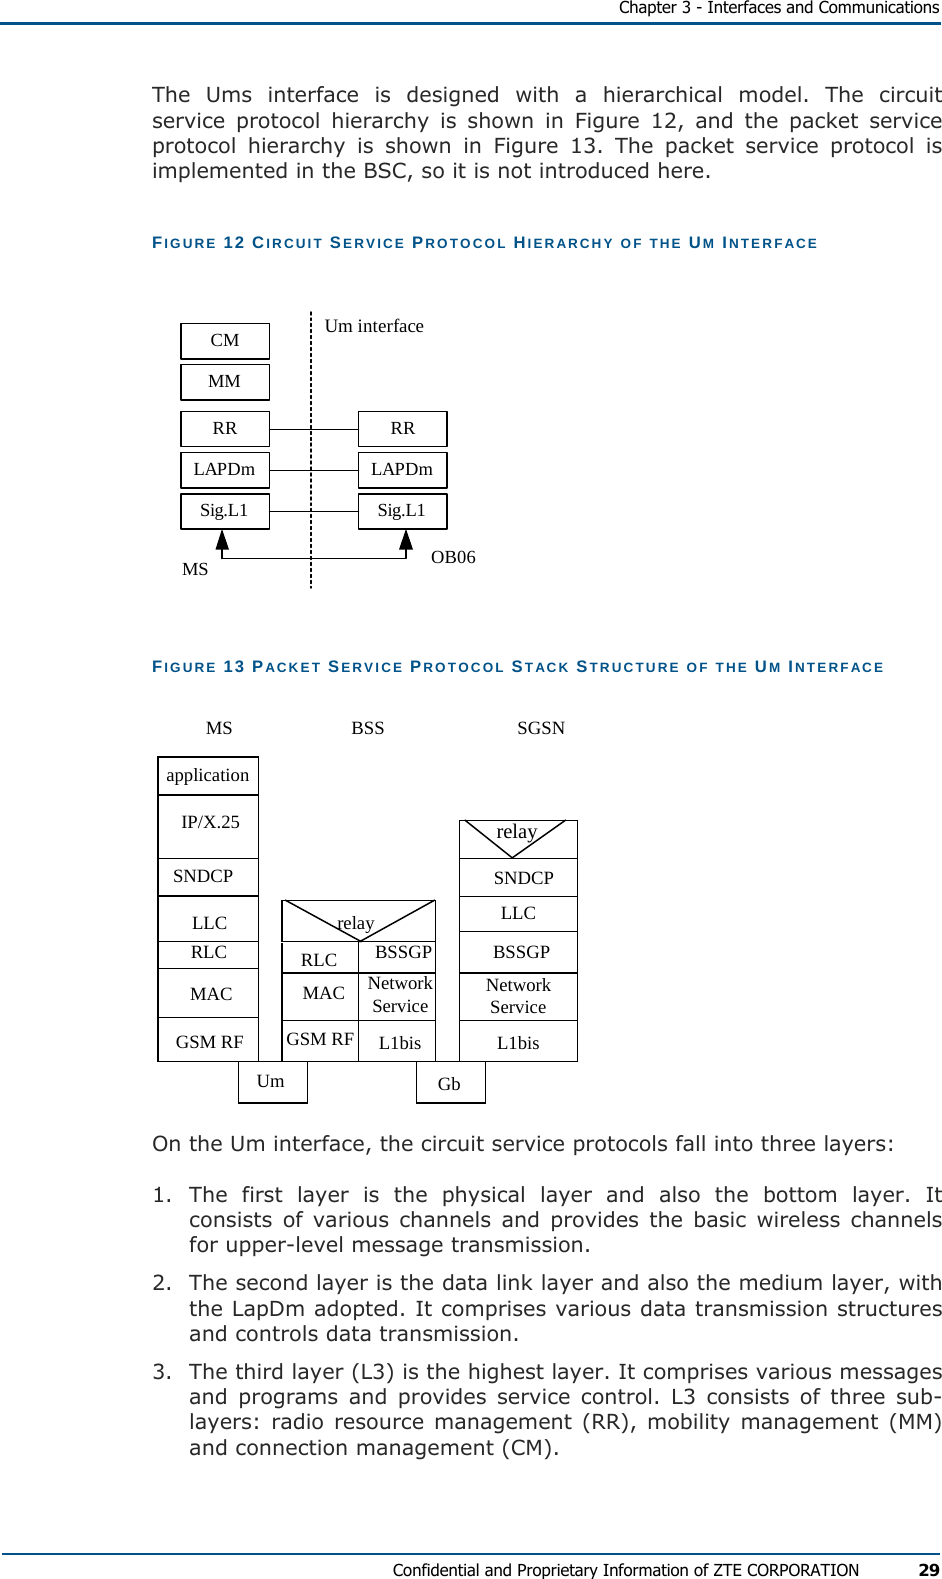   Chapter 3 - Interfaces and Communications Confidential and Proprietary Information of ZTE CORPORATION 29 The Ums interface is designed with a hierarchical model. The circuit service protocol hierarchy is shown in Figure 12, and the packet service protocol hierarchy is shown in Figure 13. The packet service protocol is implemented in the BSC, so it is not introduced here. FIGURE 12 CIRCUIT SERVICE PROTOCOL HIERARCHY OF THE UM INTERFACE CMMMRRLAPDmSig.L1 Sig.L1LAPDmRRMS OB06Um interface FIGURE 13 PACKET SERVICE PROTOCOL STACK STRUCTURE OF THE UM INTERFACE MSUm GbBSS SGSNBSSGPLLCSNDCPNetworkServiceL1bisrelayBSSGPL1bisRLCMACGSM RFrelayRLCMACGSM RFSNDCPIP/X.25applicationLLCNetworkService On the Um interface, the circuit service protocols fall into three layers: 1. The first layer is the physical layer and also the bottom layer. It consists of various channels and provides the basic wireless channels for upper-level message transmission. 2.  The second layer is the data link layer and also the medium layer, with the LapDm adopted. It comprises various data transmission structures and controls data transmission. 3.  The third layer (L3) is the highest layer. It comprises various messages and programs and provides service control. L3 consists of three sub-layers: radio resource management (RR), mobility management (MM) and connection management (CM). 